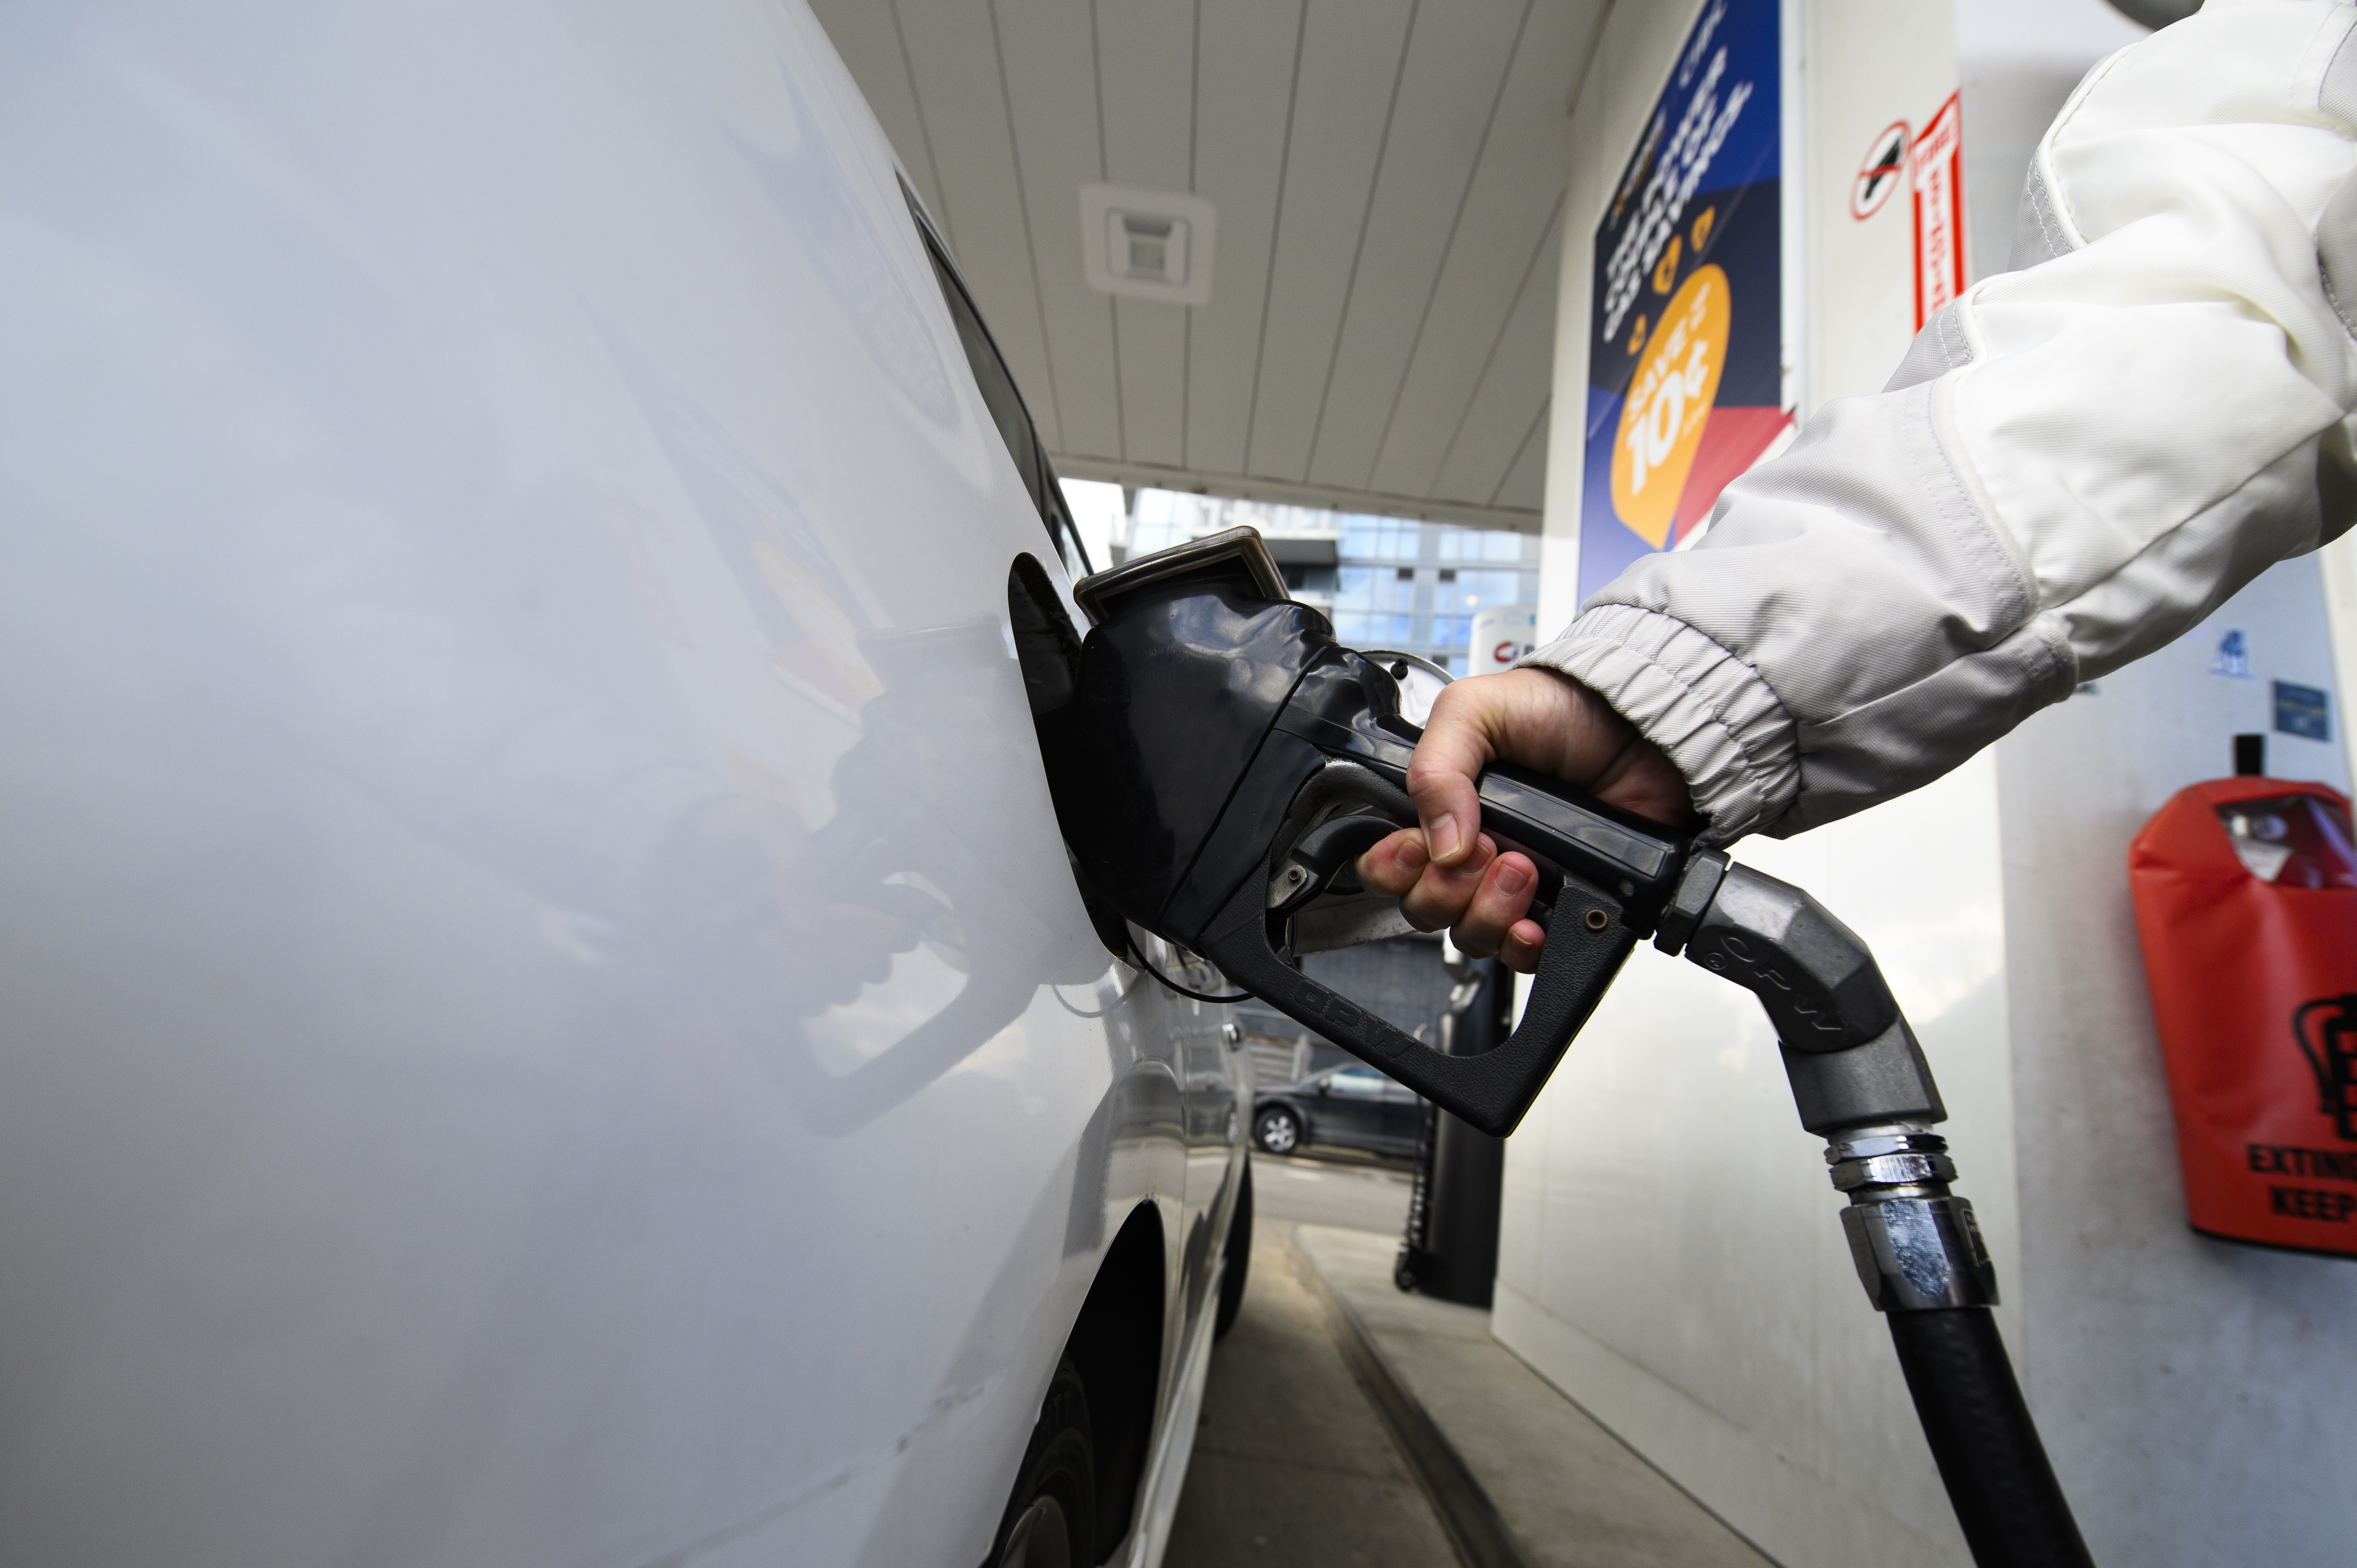 Gas prices surge in some parts of Canada. What’s causing pain at the pumps?